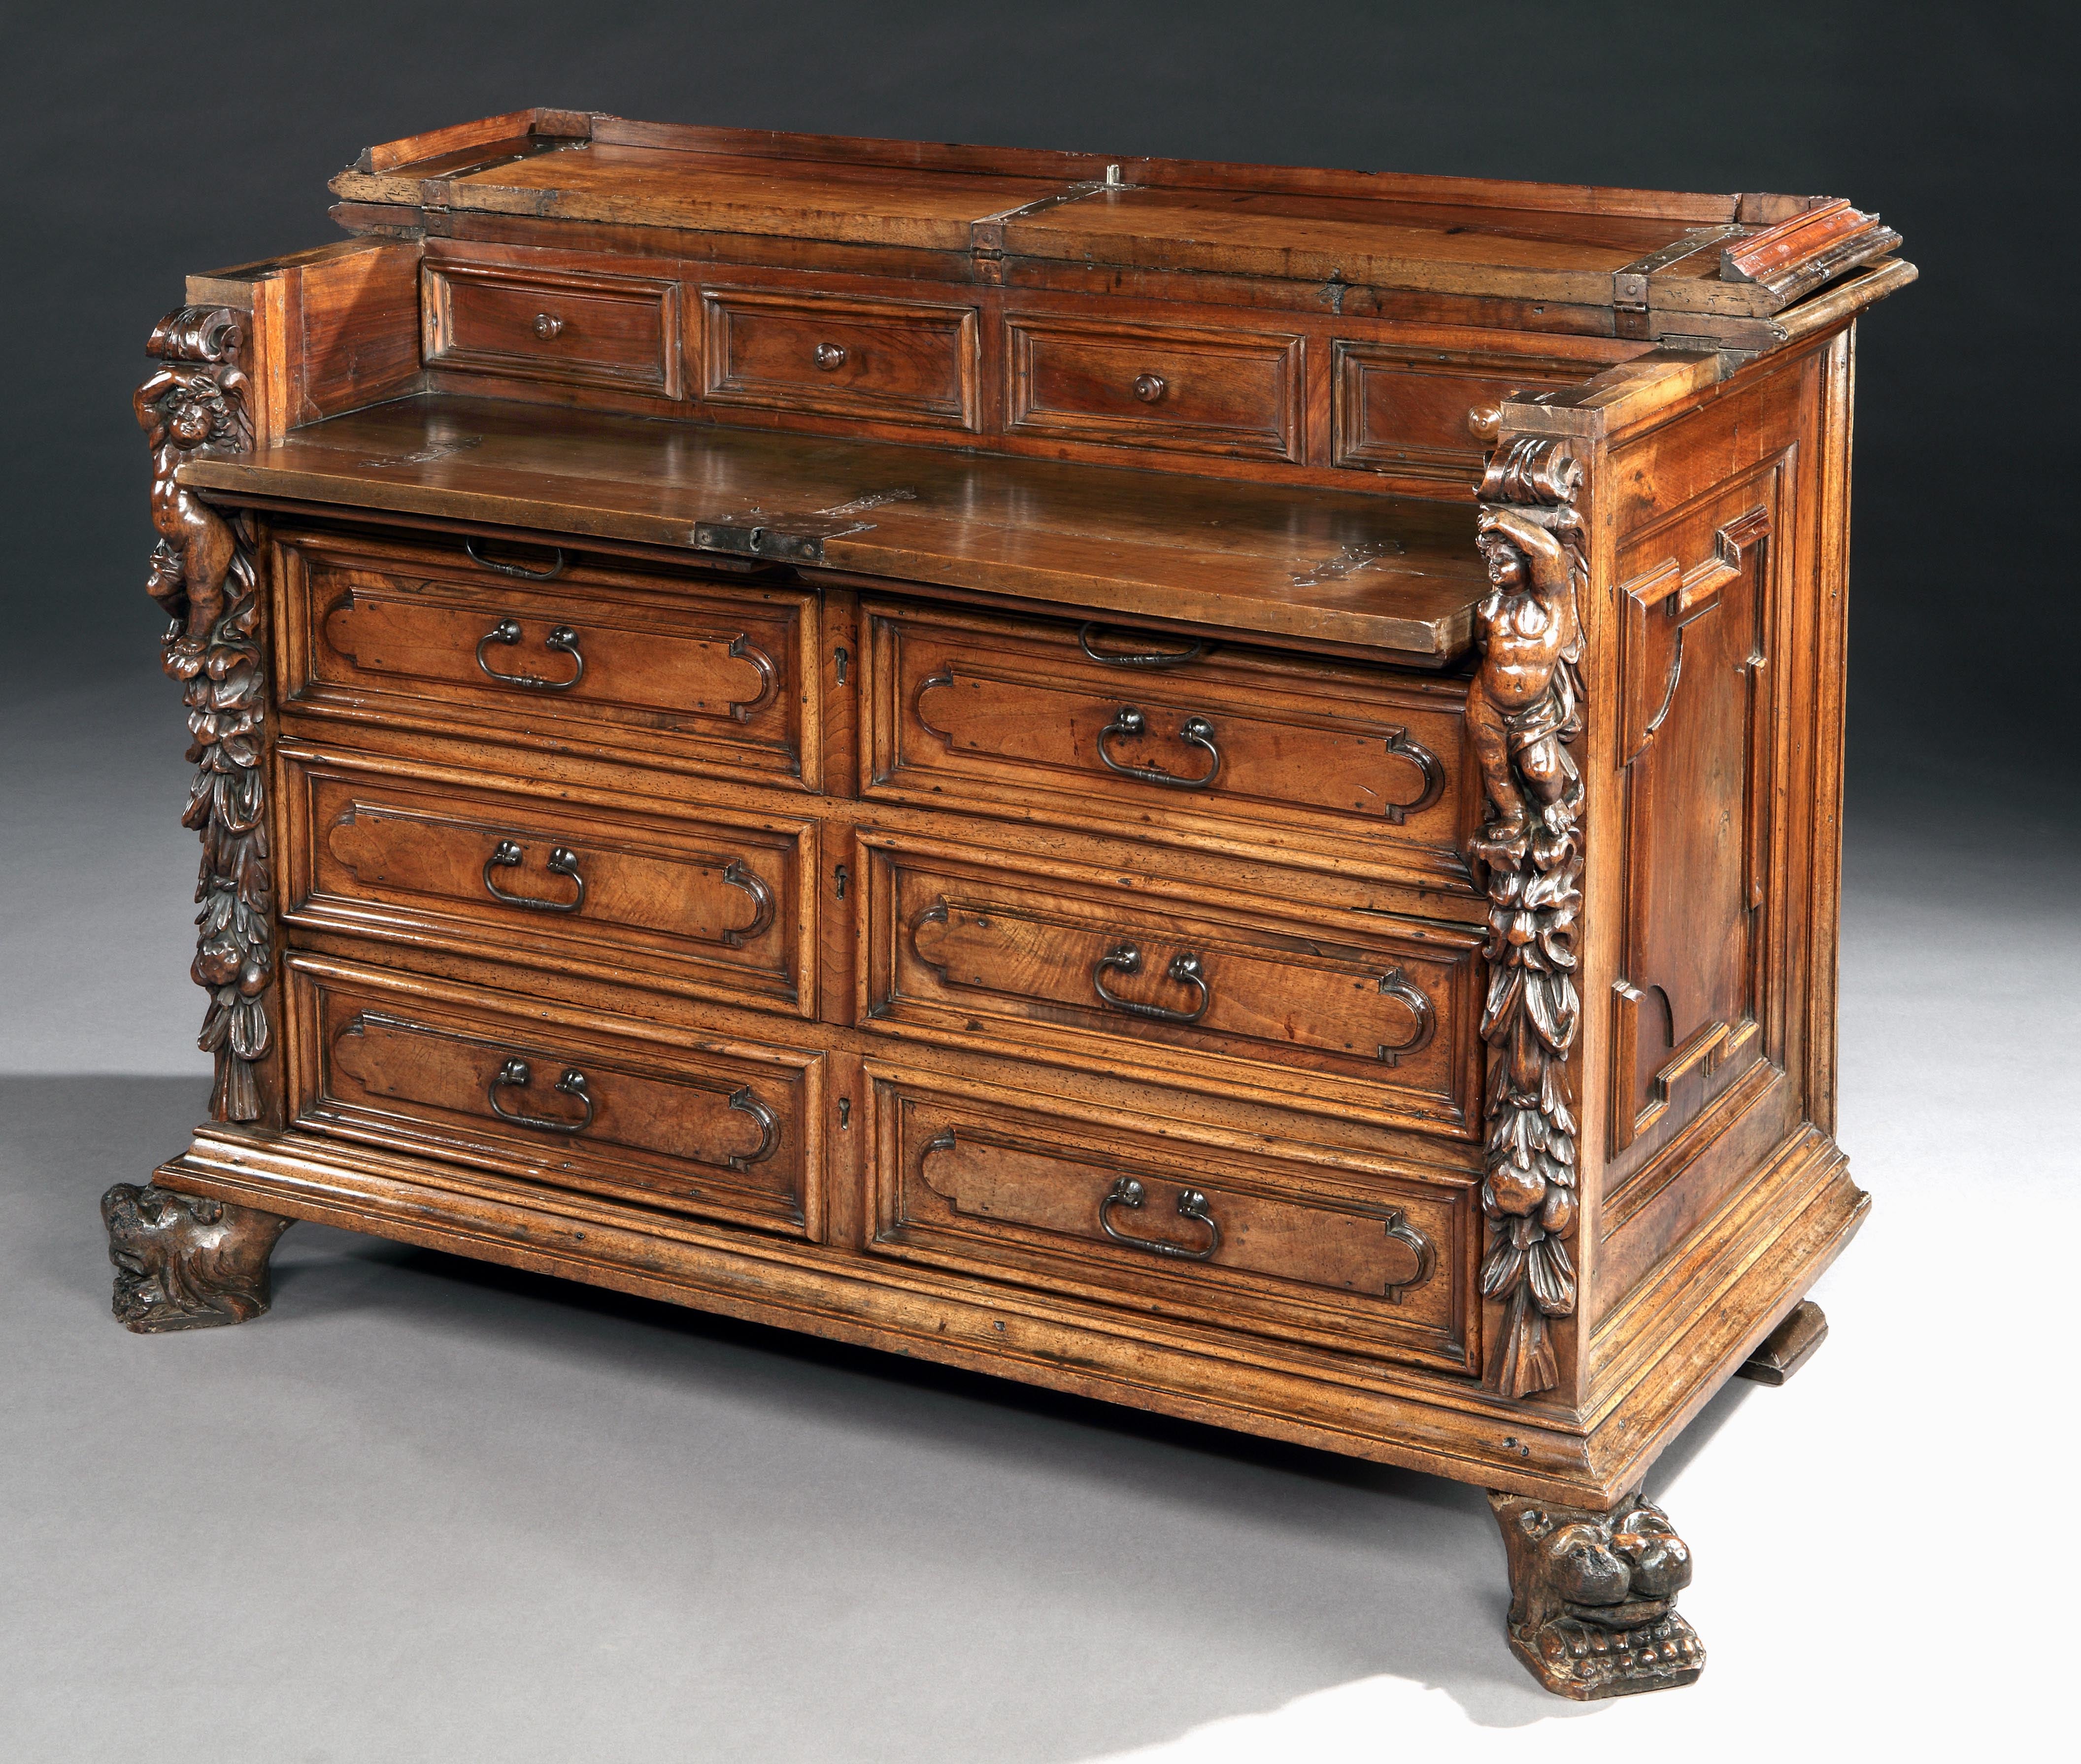 Exceptional museum quality, Italian, renaissance walnut cassettone with fitted bureau in the upper part & exceptional Bambocci carving, Lombardy.

This magnificent cassettone exudes the character and quality of the finest, late-Renaissance